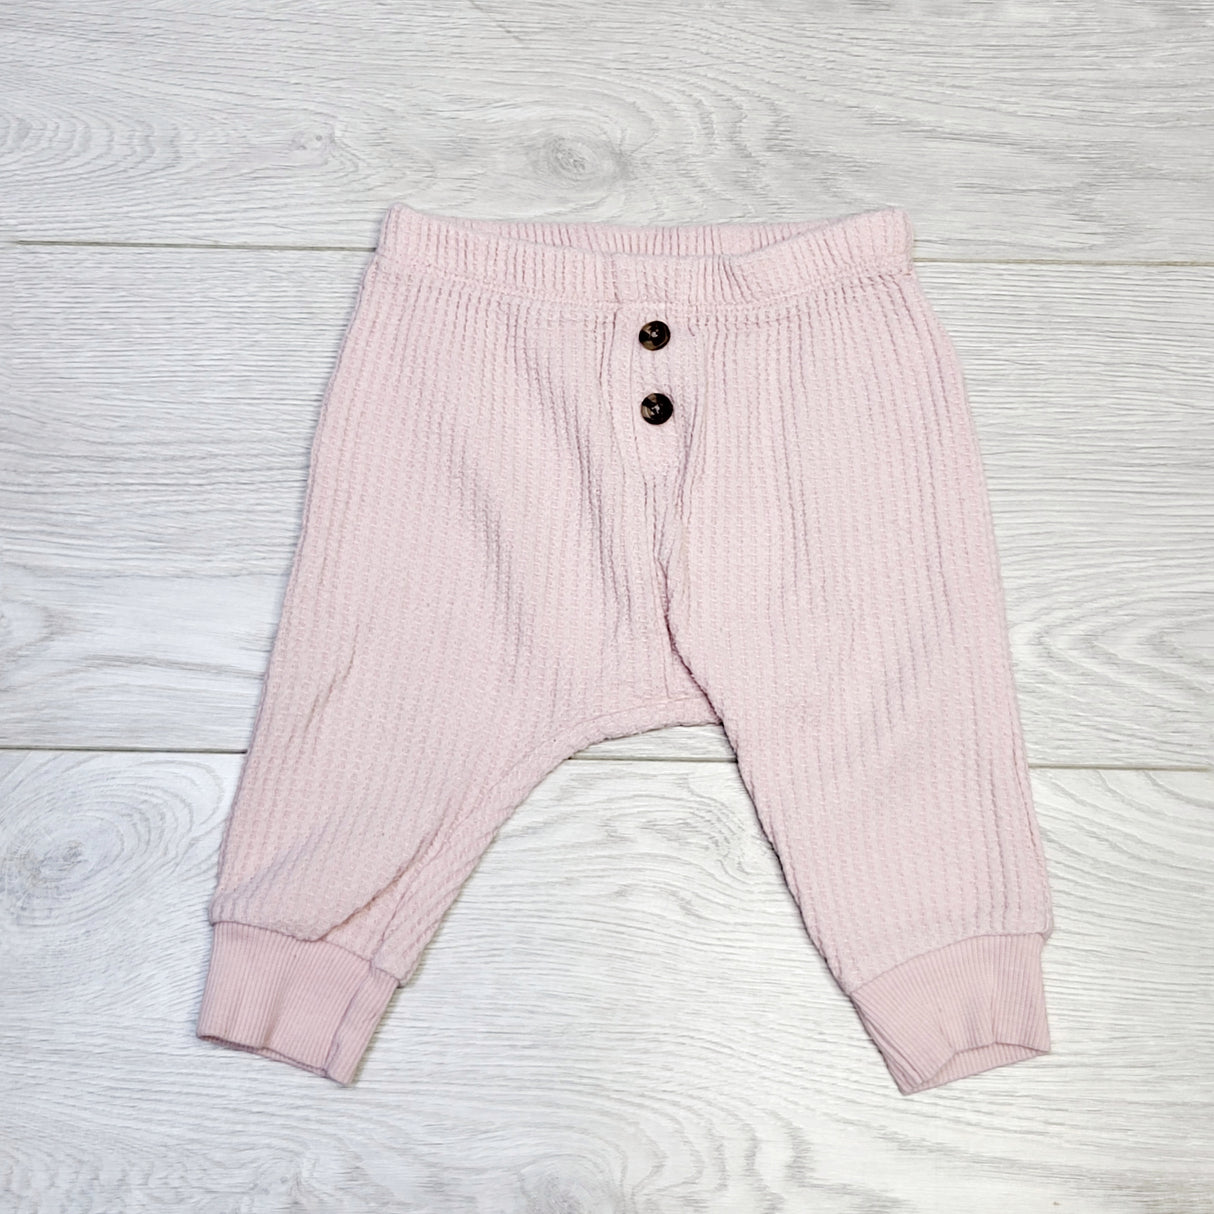 COWN1 - Old Navy pink waffle knit pants.  Size 3-6 months